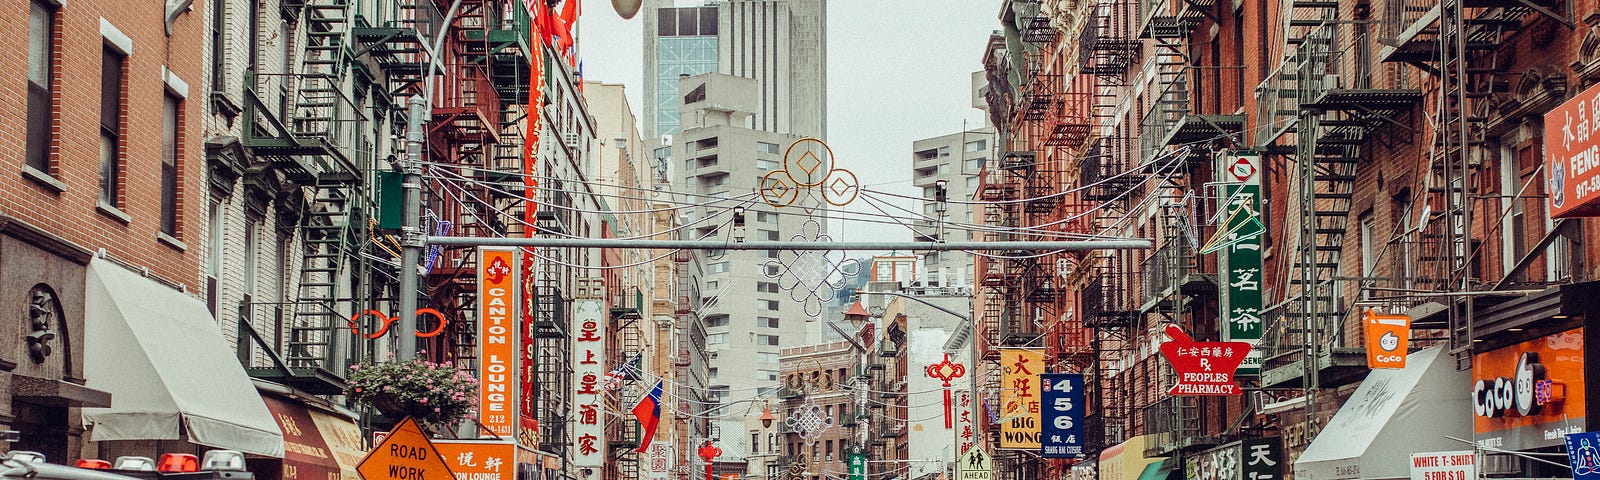 A view of Chinatown shows traffic in a narrow street, colourful banners and shop signs, people walking on crowded footpaths, and all the colour of a multi-cultural cityscape.